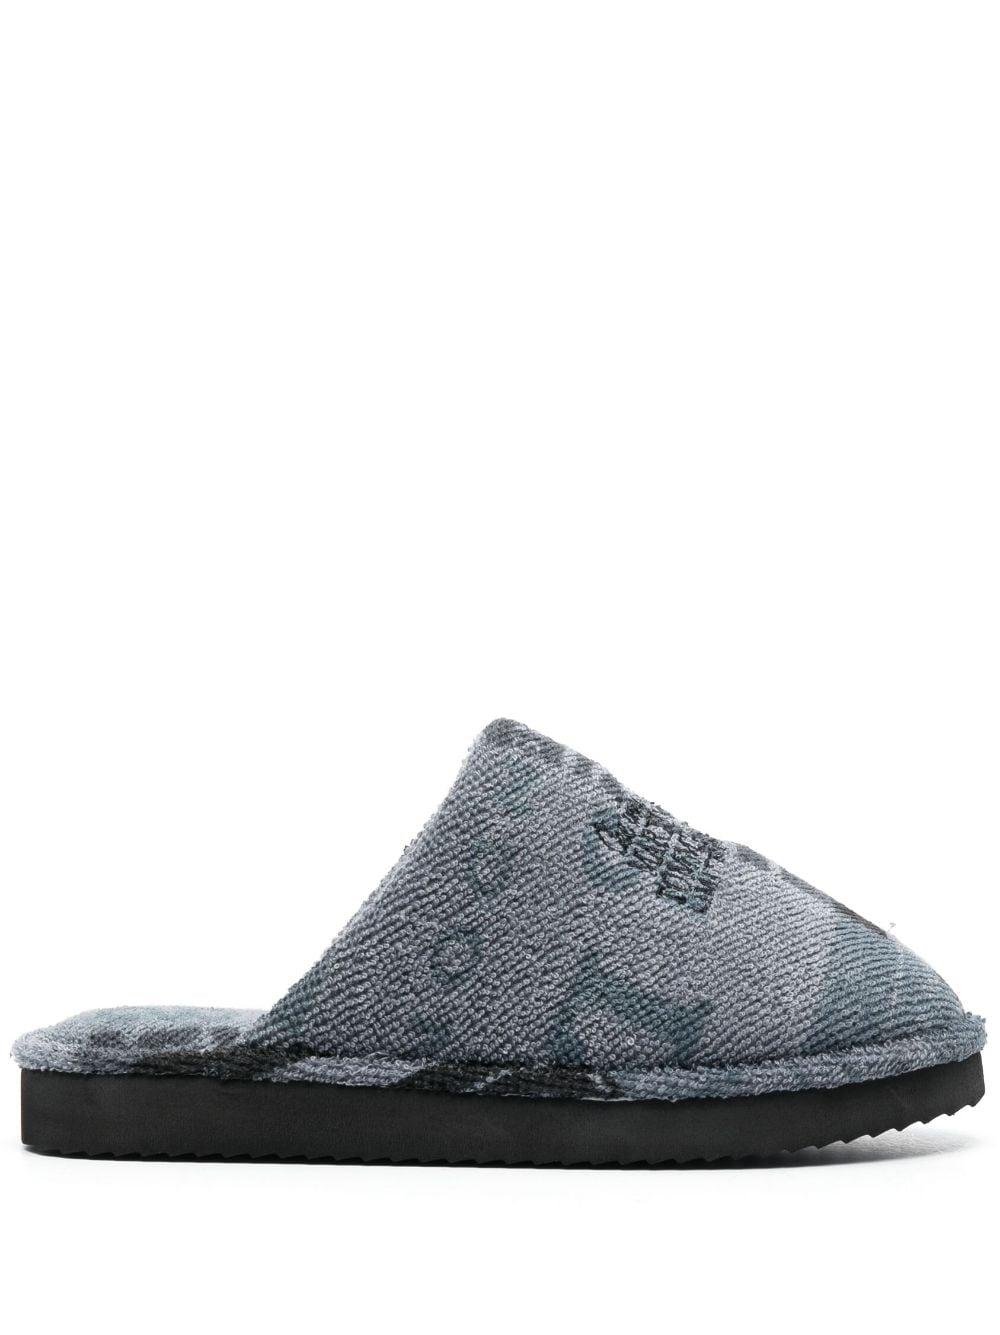 Martine Rose Tommy Hilfiger Slippers in | Lyst